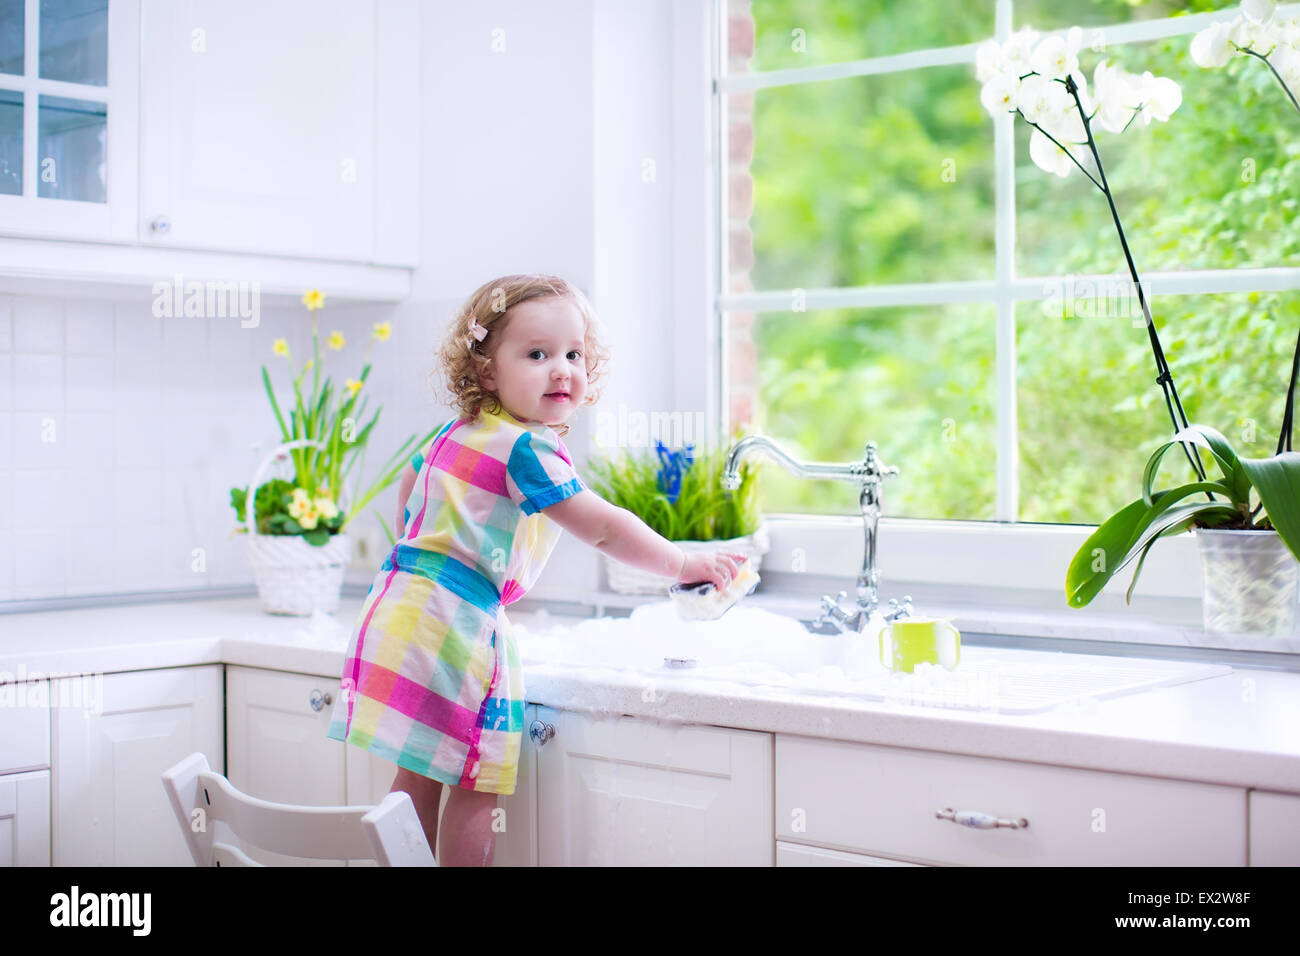 Child washing dishes. Kids wash plates and cups. Little girl helping in the kitchen playing with water and foam in a white sink Stock Photo